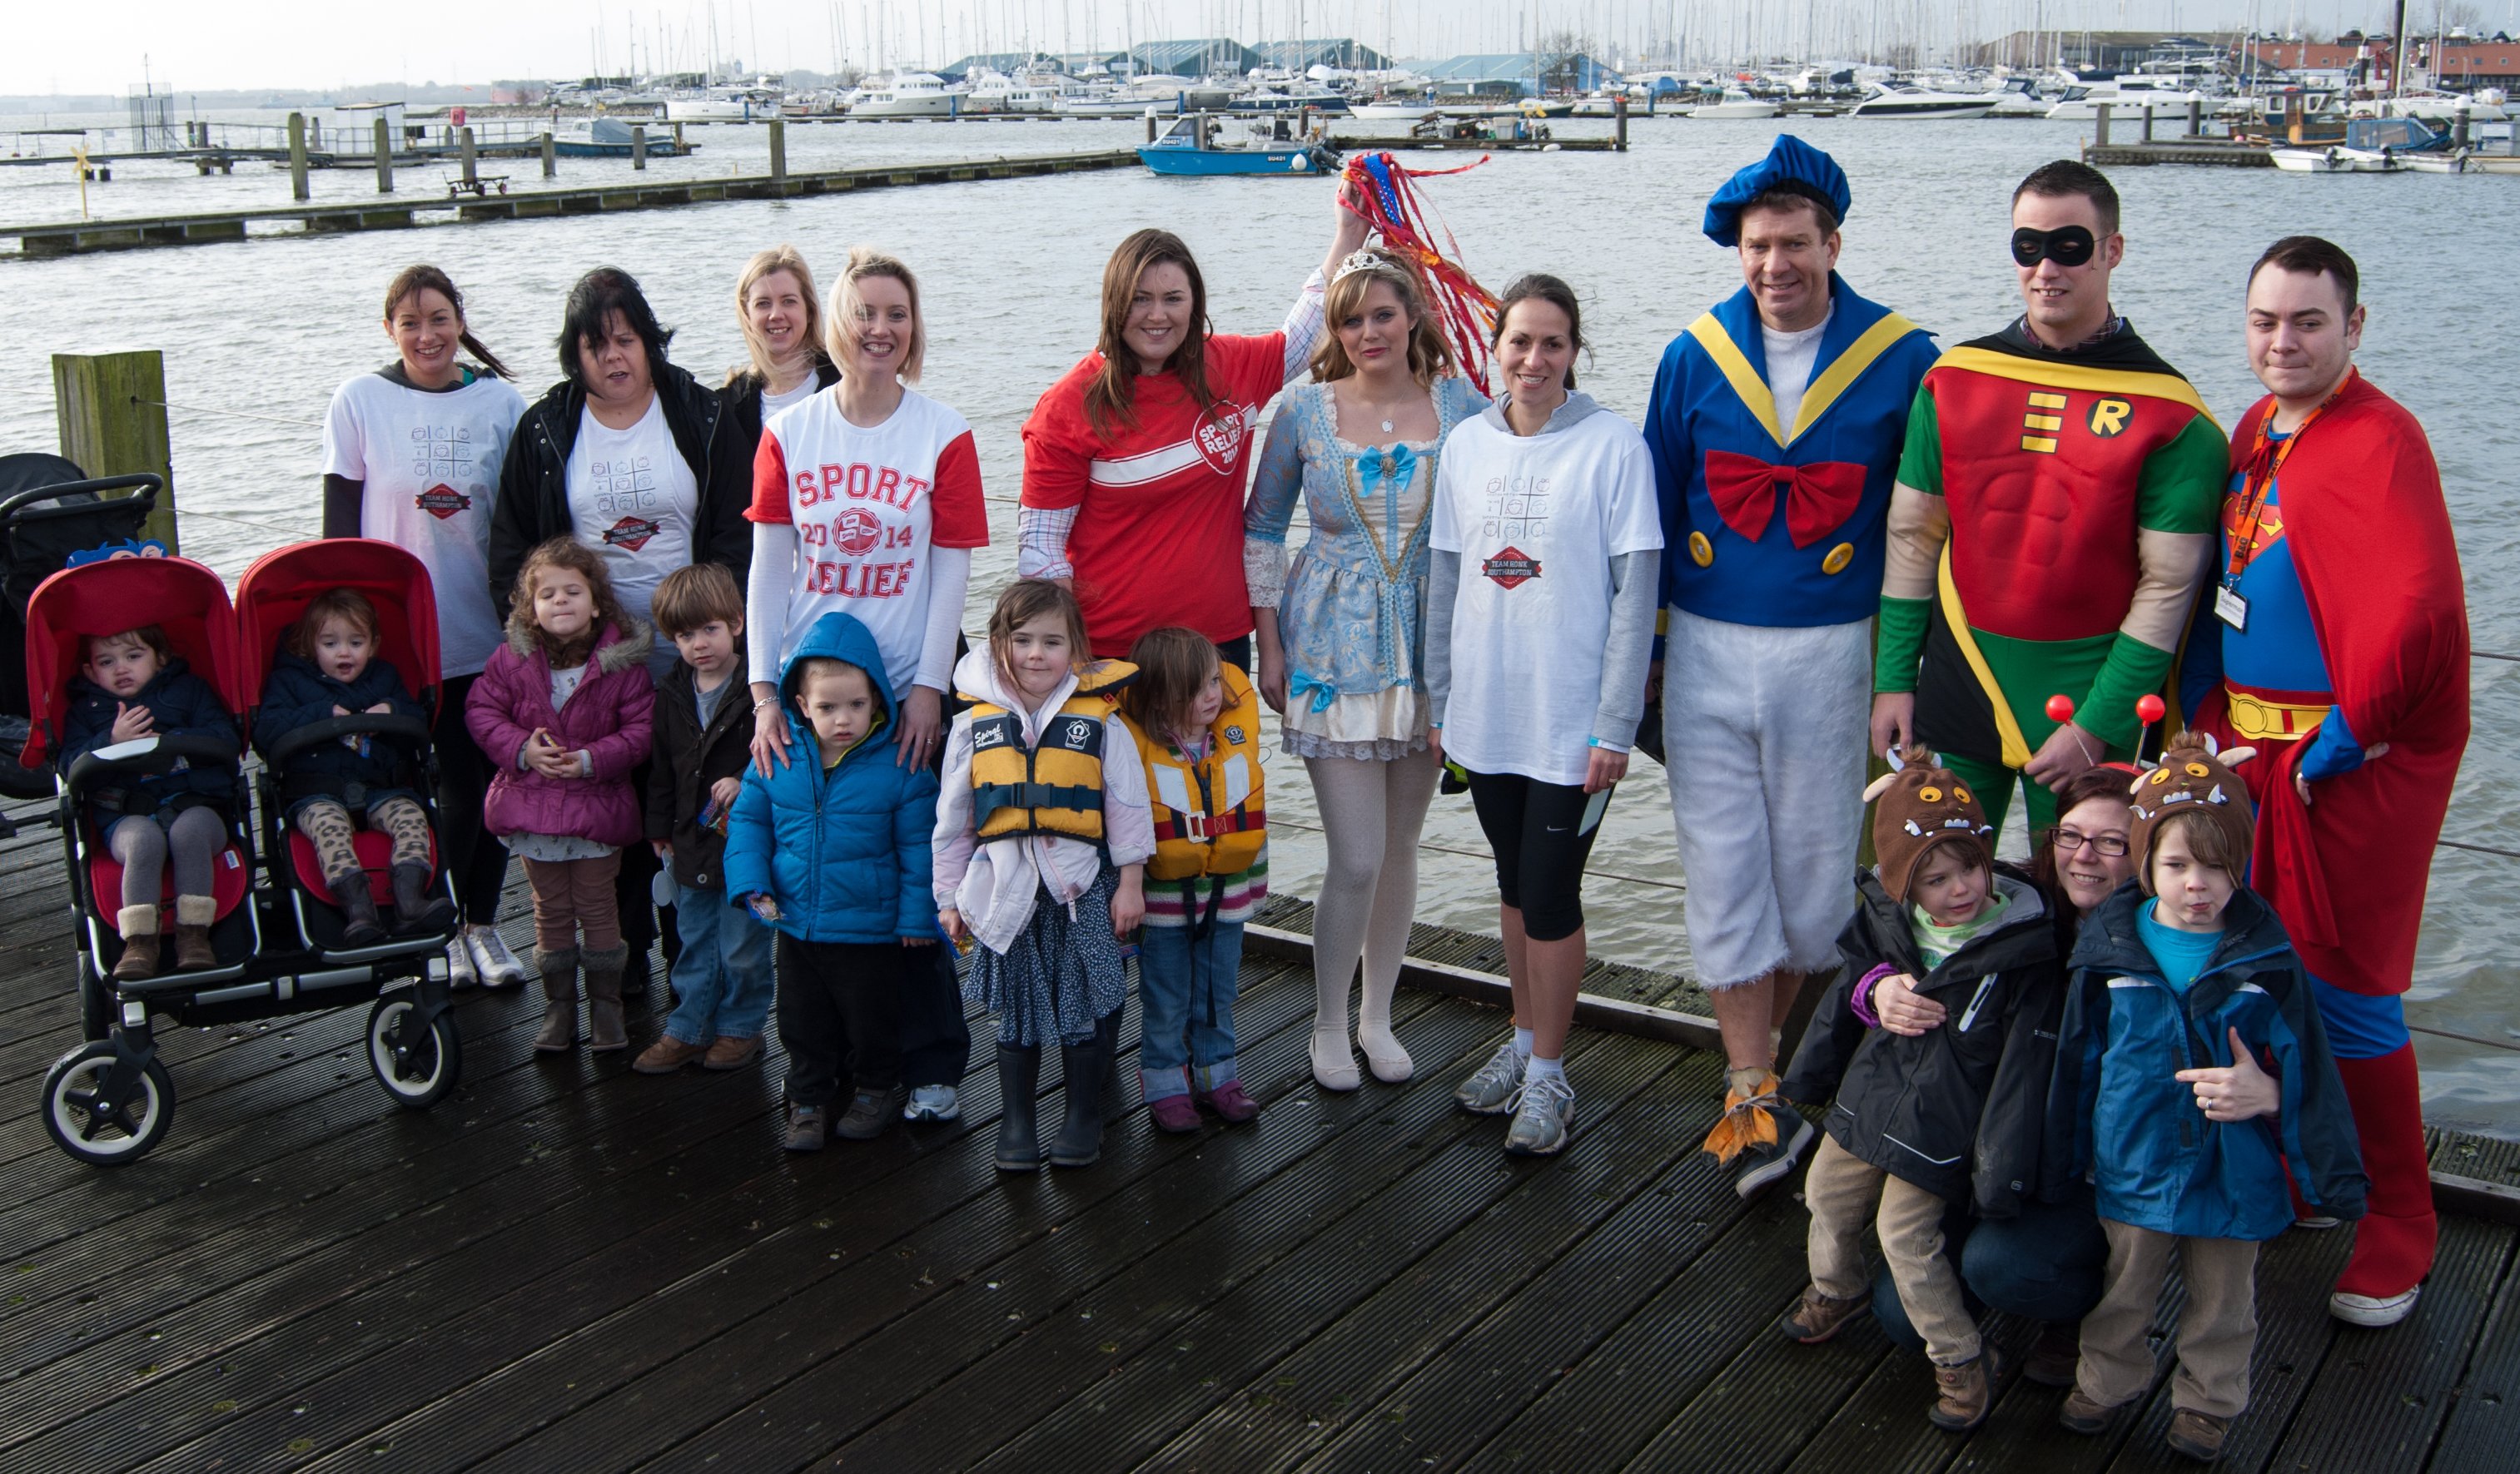 Hading over the baton from TJ Marine to me, Lisa, twin families and B&Q staff in fancy dress